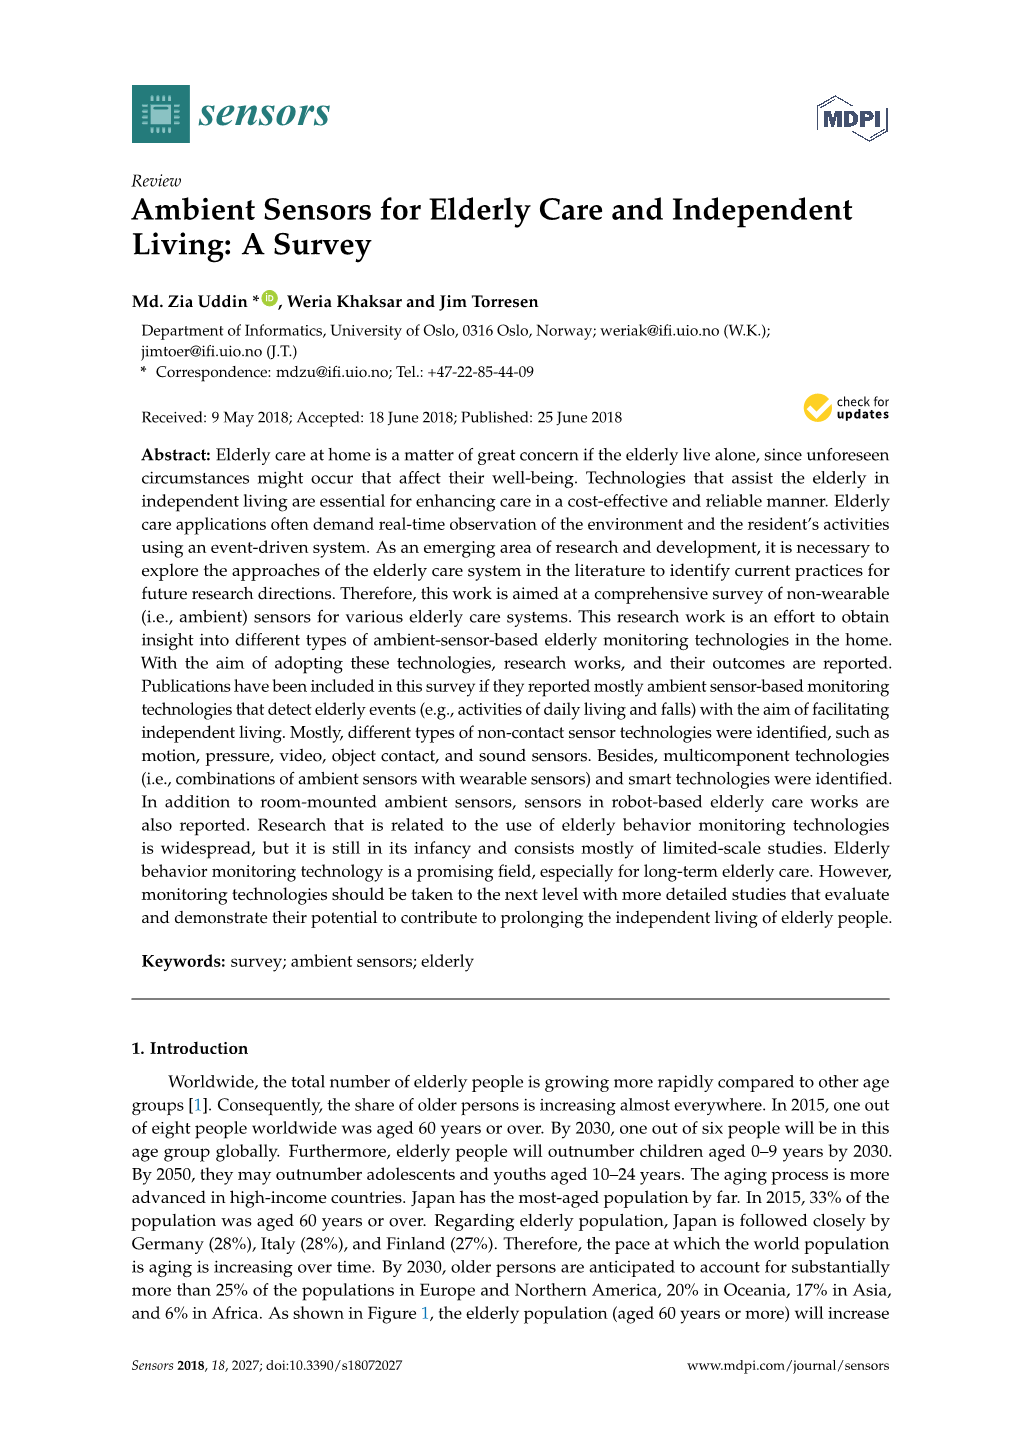 Ambient Sensors for Elderly Care and Independent Living: a Survey